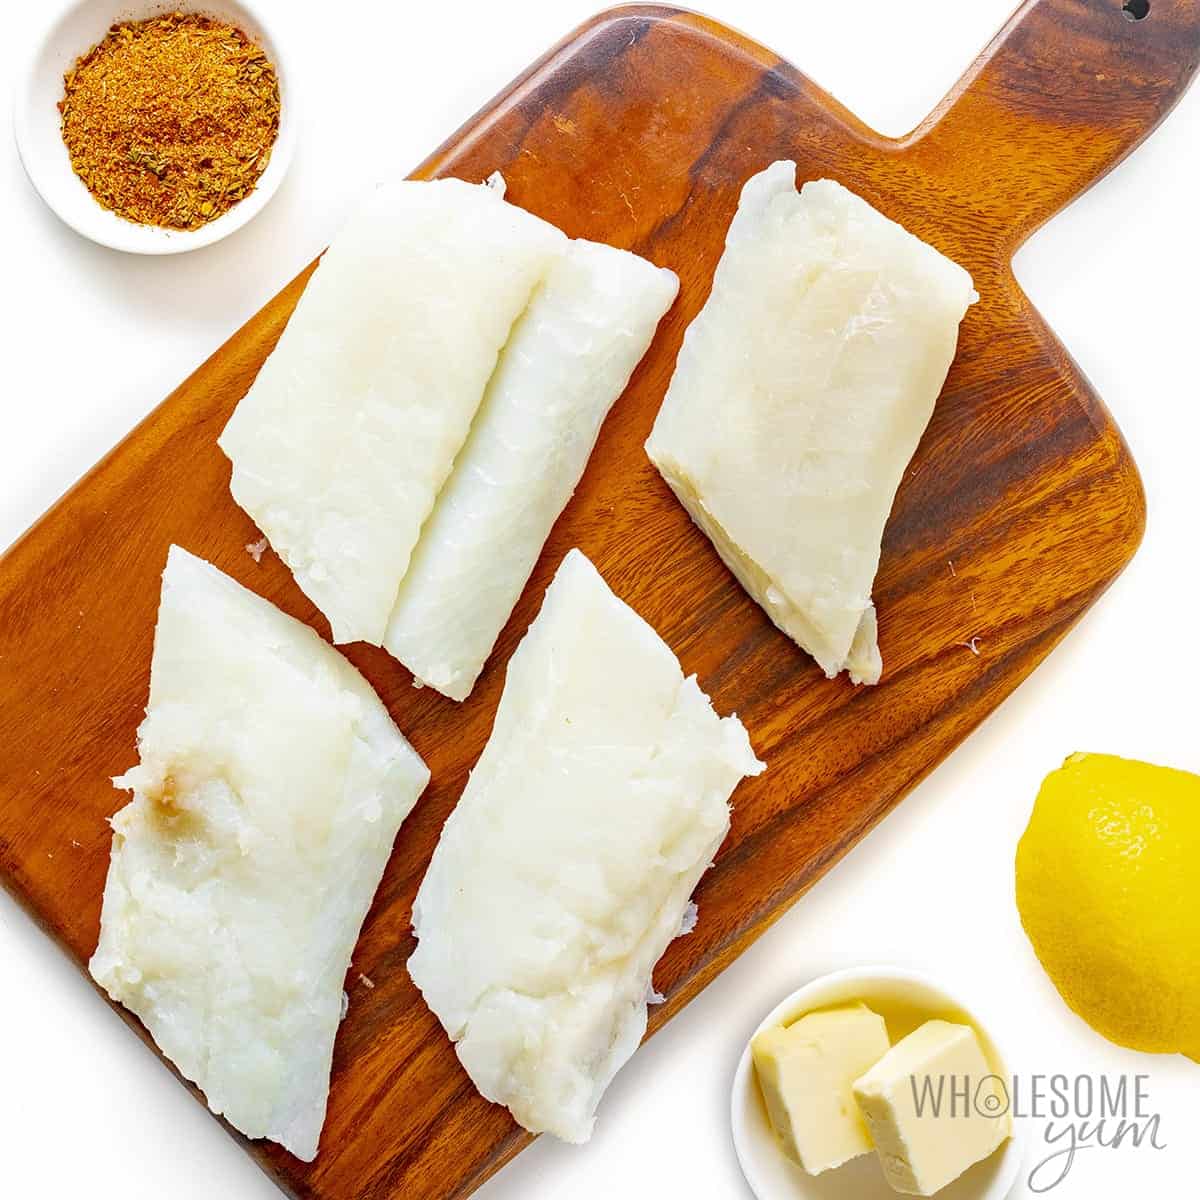 Grilled cod recipe ingredients in bowls.